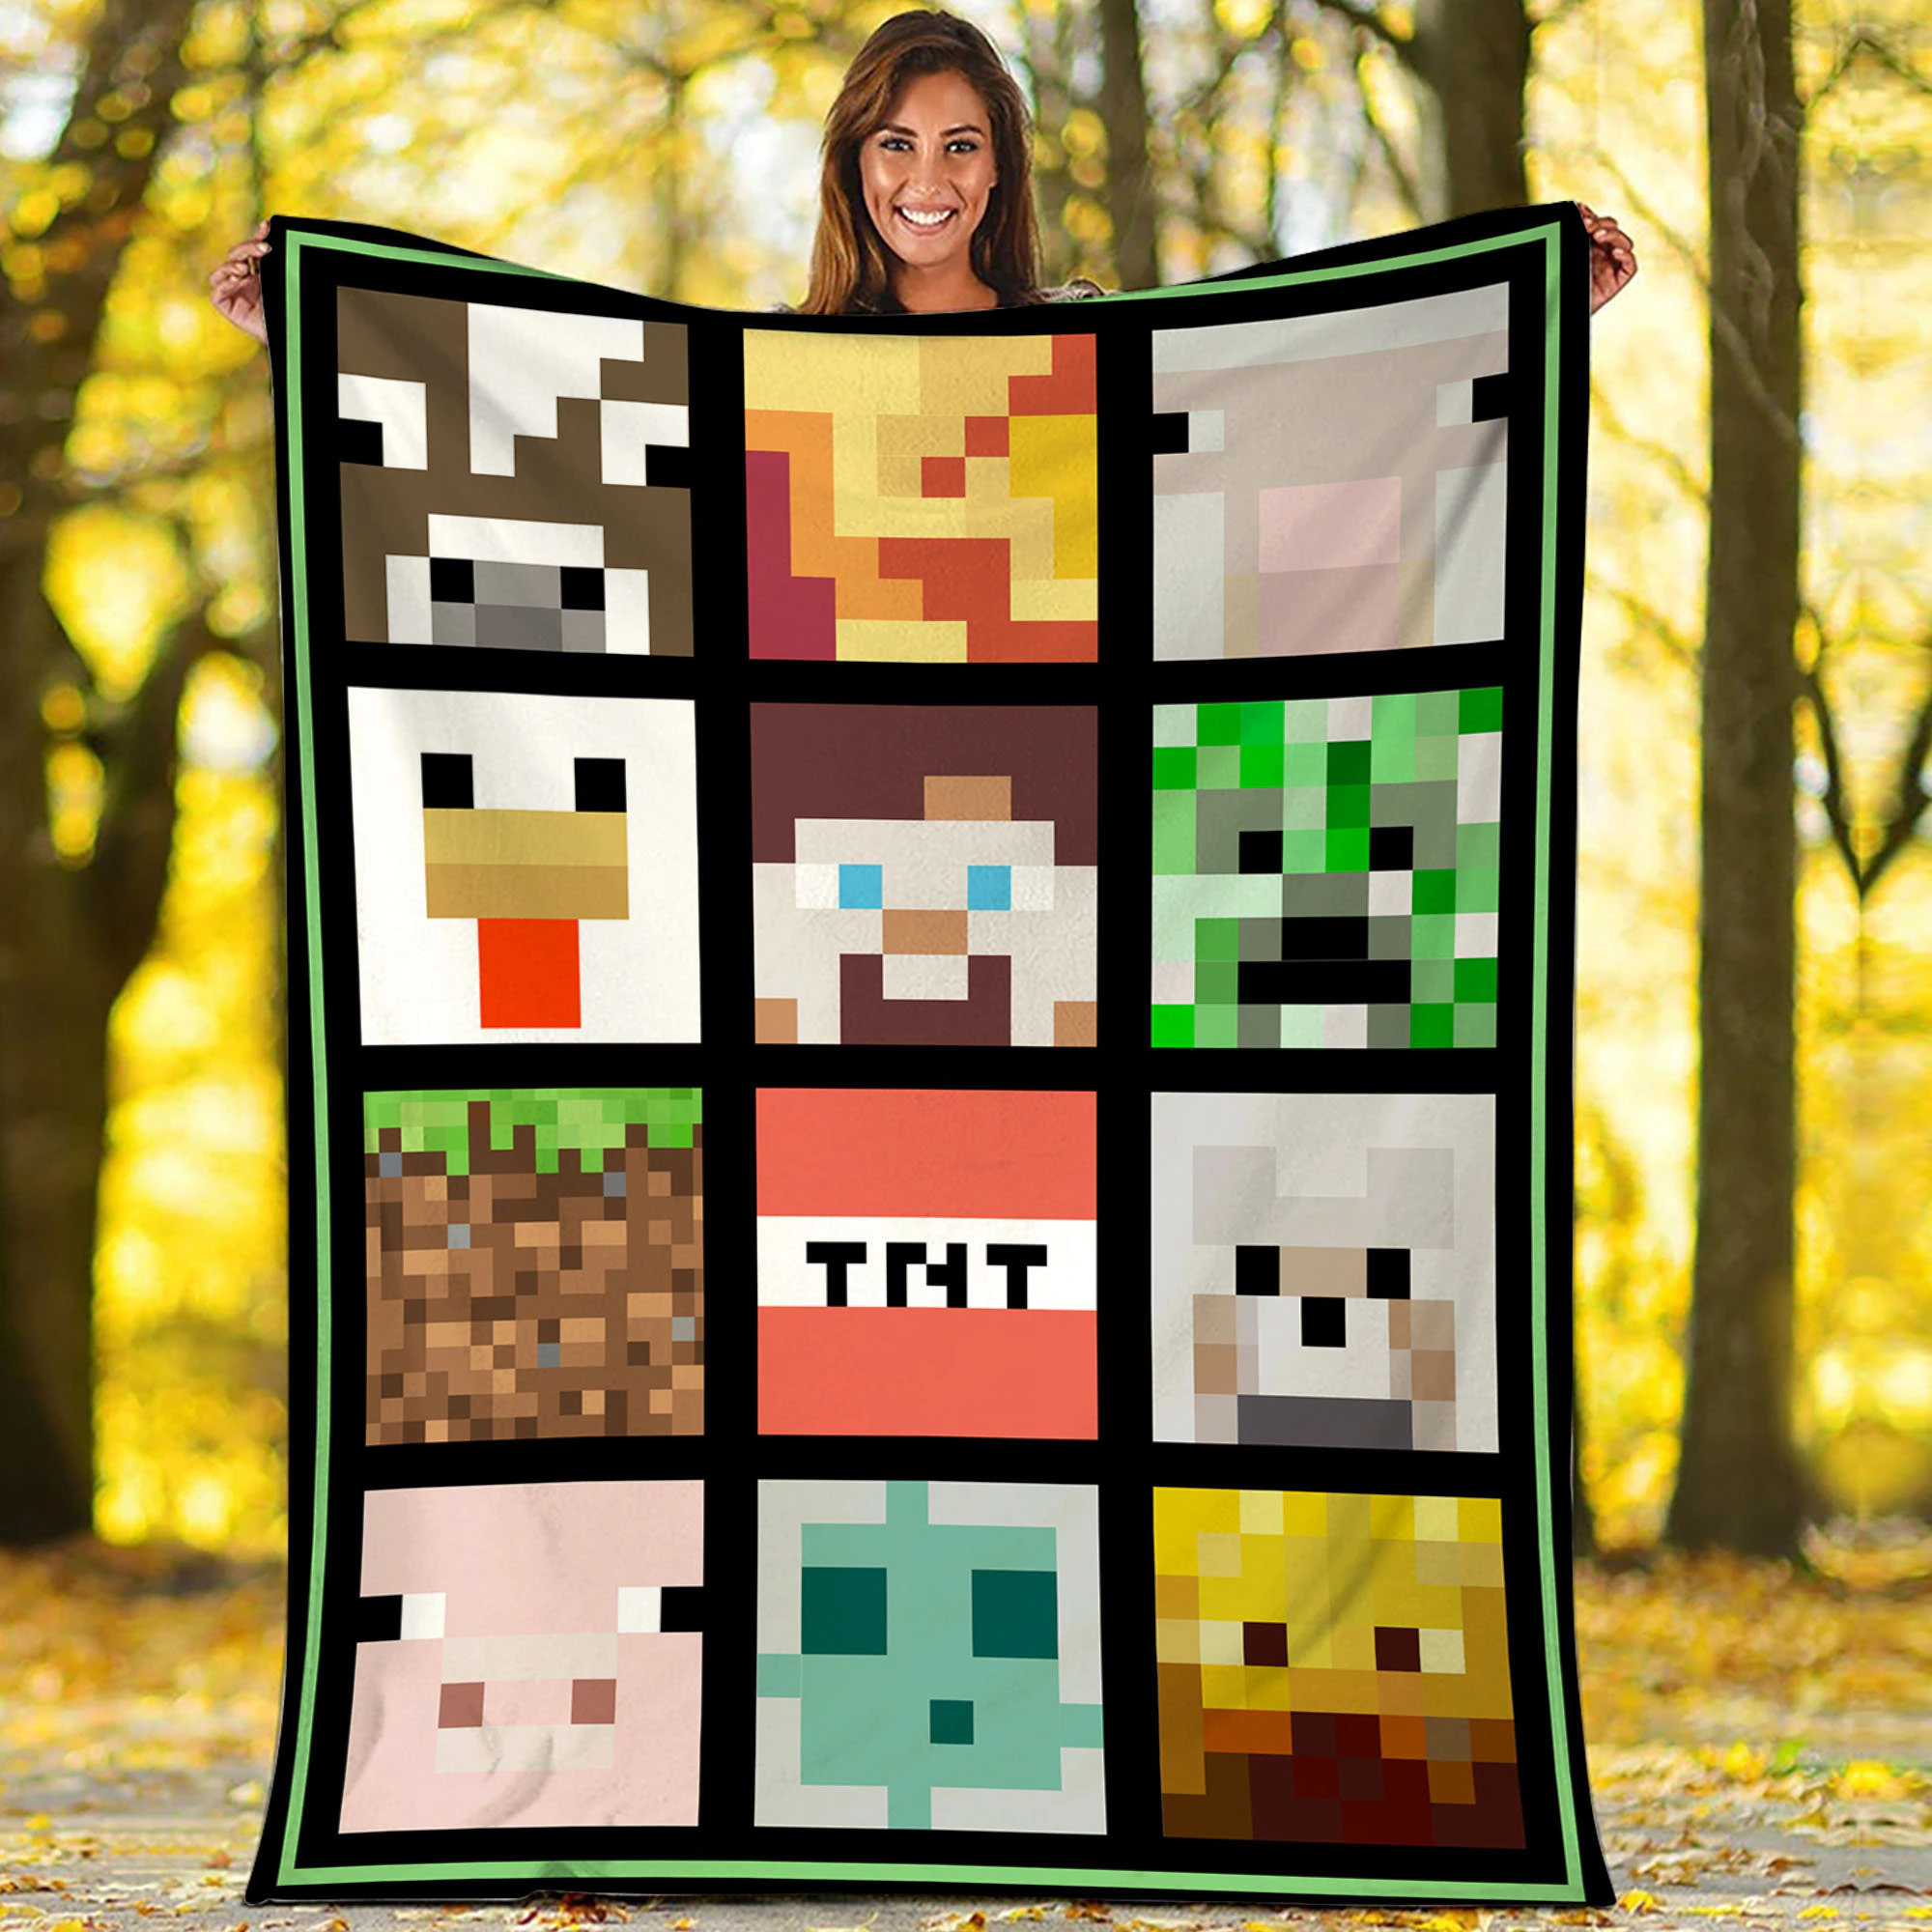 Minecra Fleece Blanket Minecra Game Gamer Gaming Throw Blanket For Bed Couch Sofa Christmas Gifts